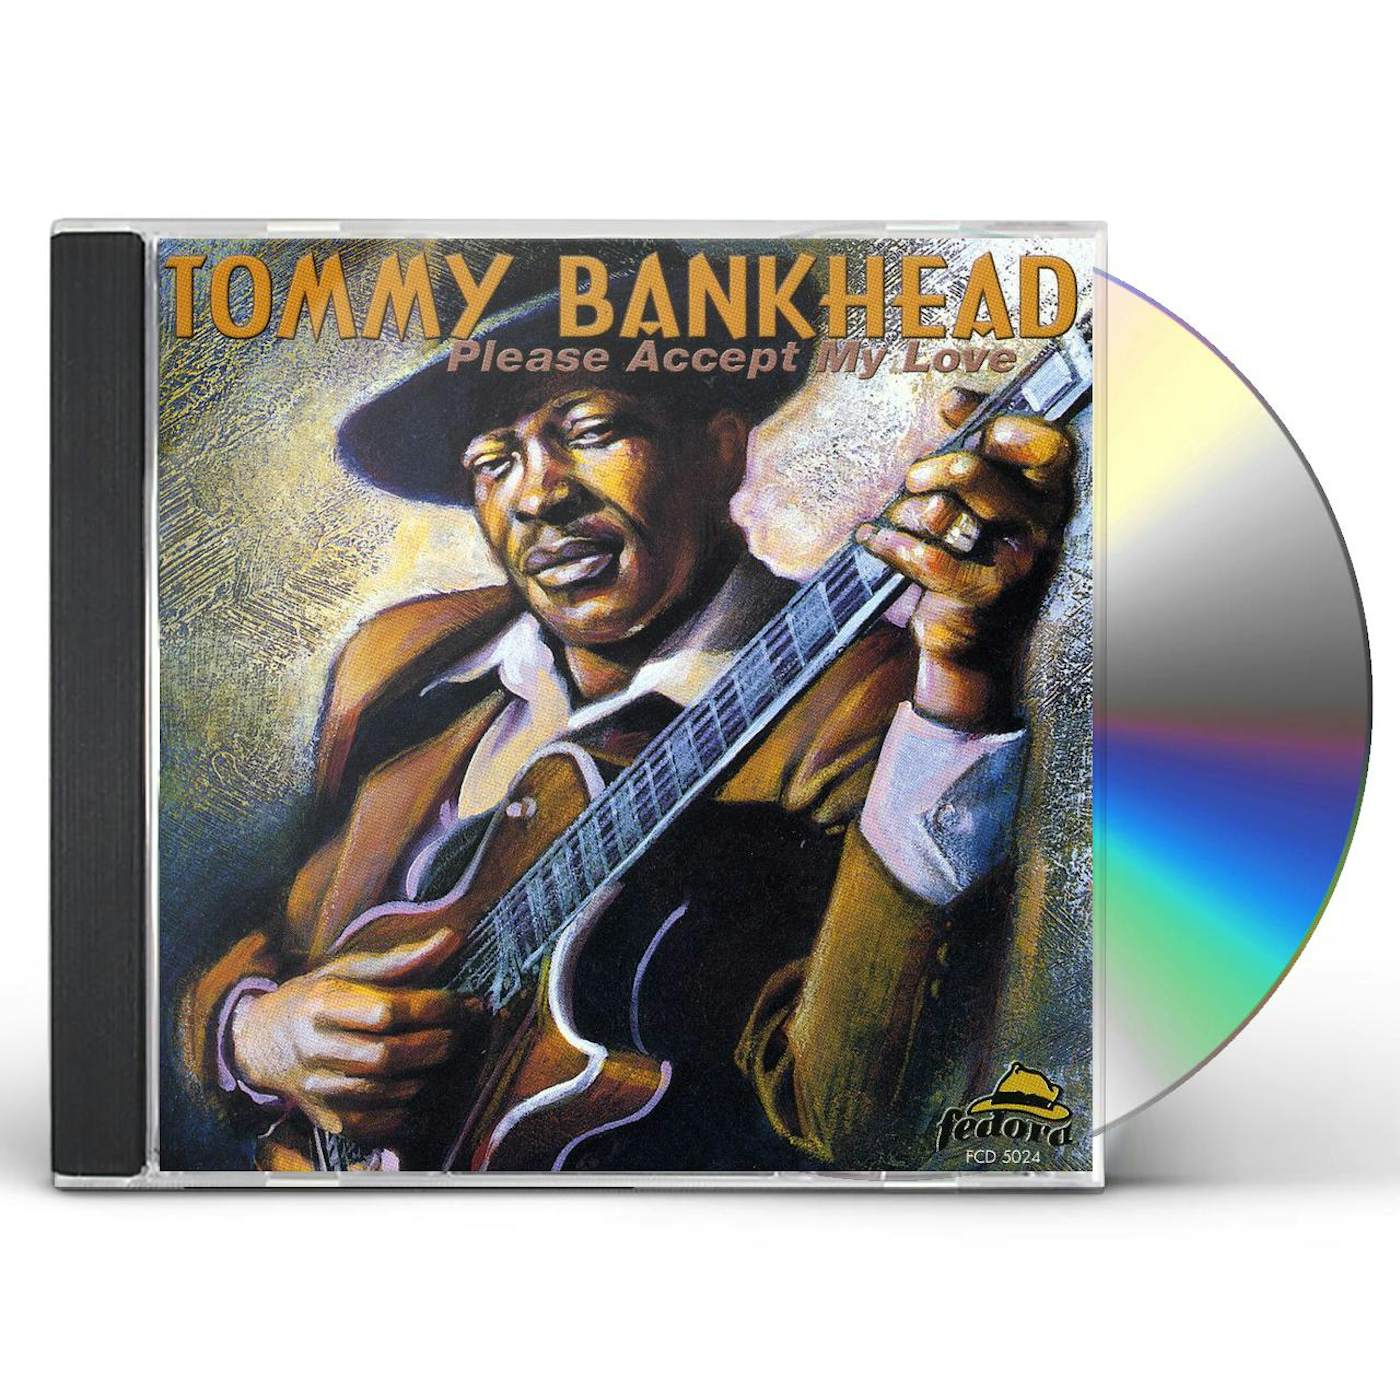 Tommy Bankhead PLEASE ACCEPT MY LOVE CD